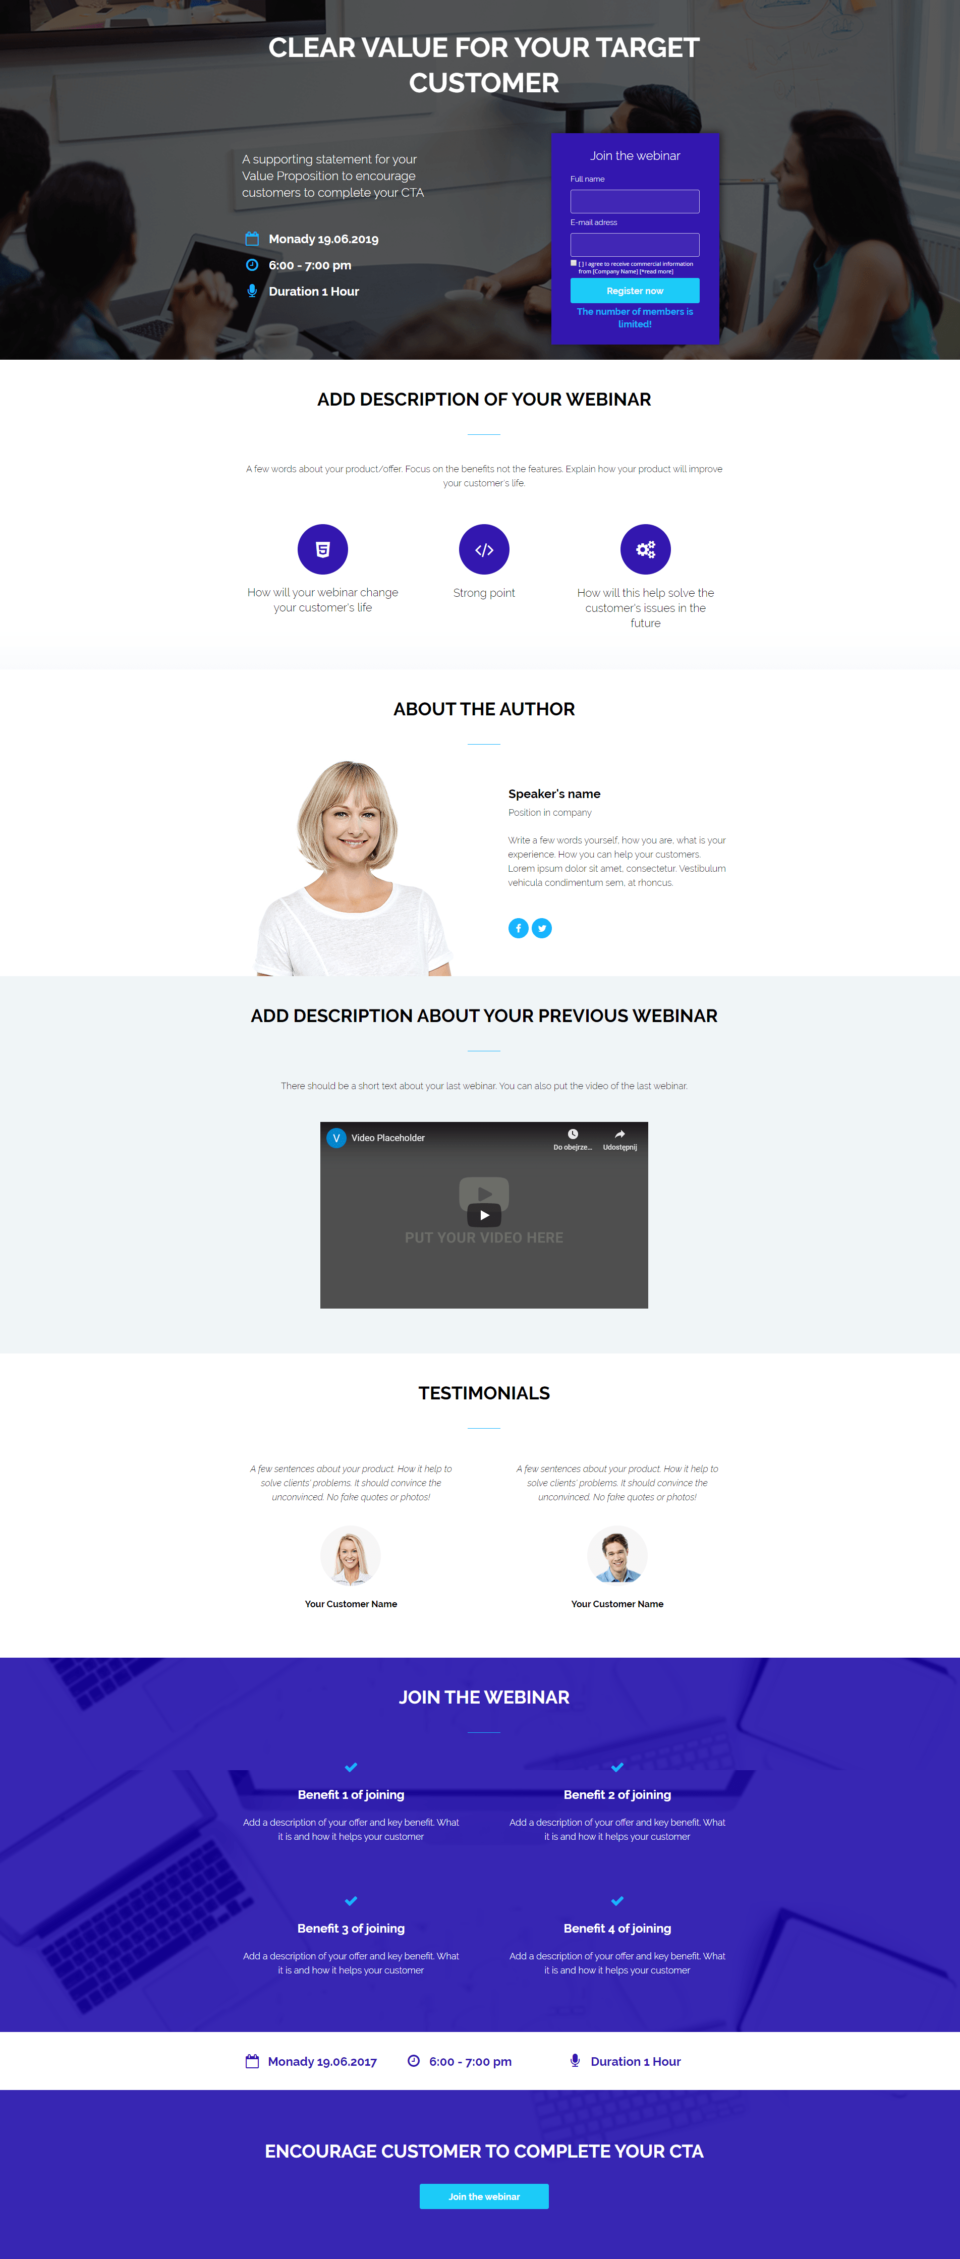 Landing page template